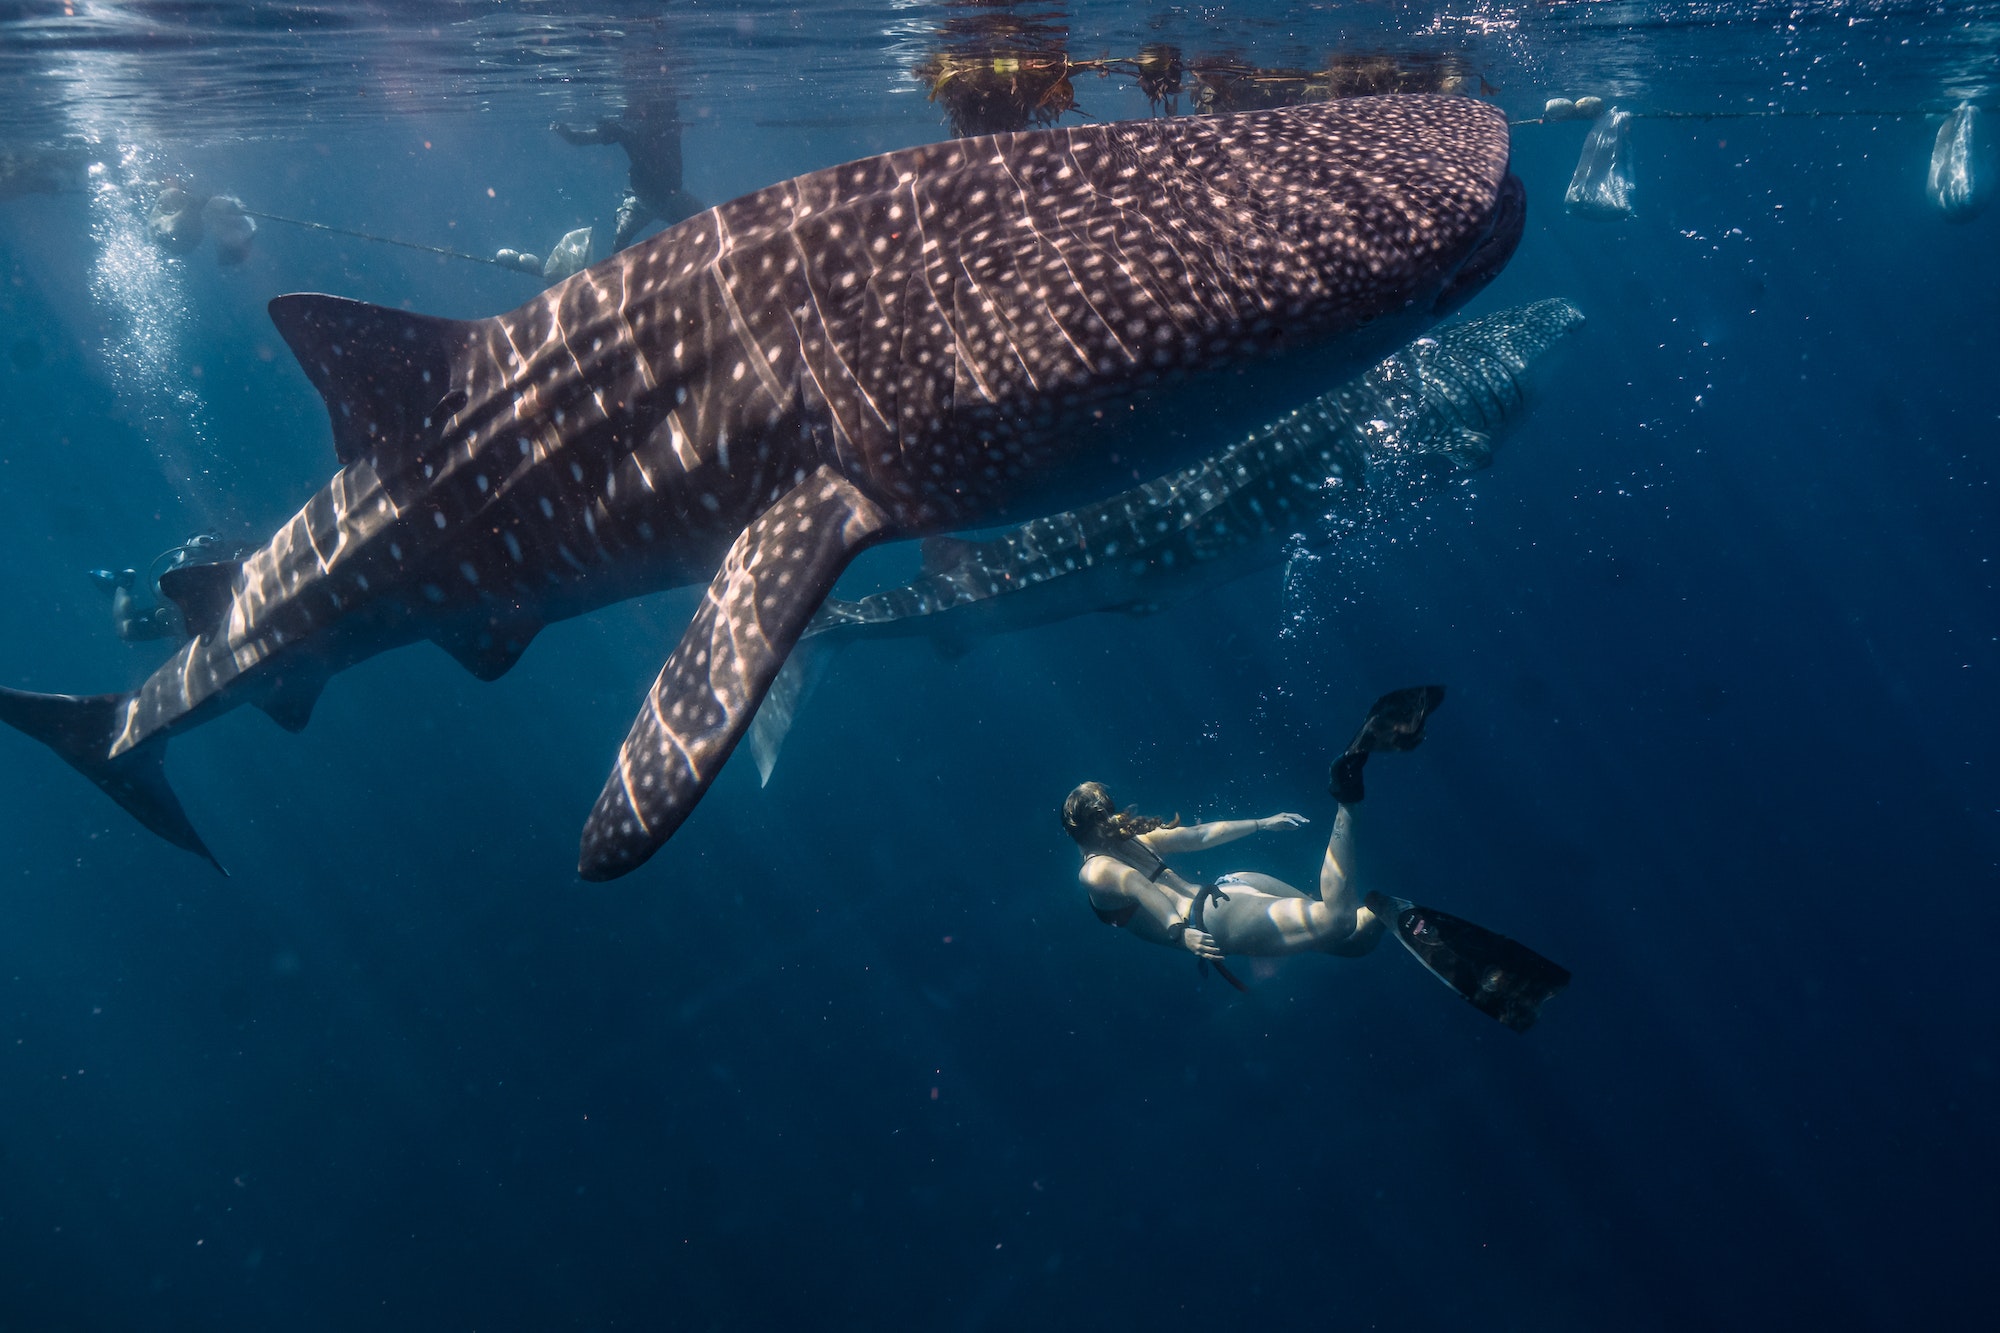 Female diver under the water with whale sharks (Rhincodon typus)